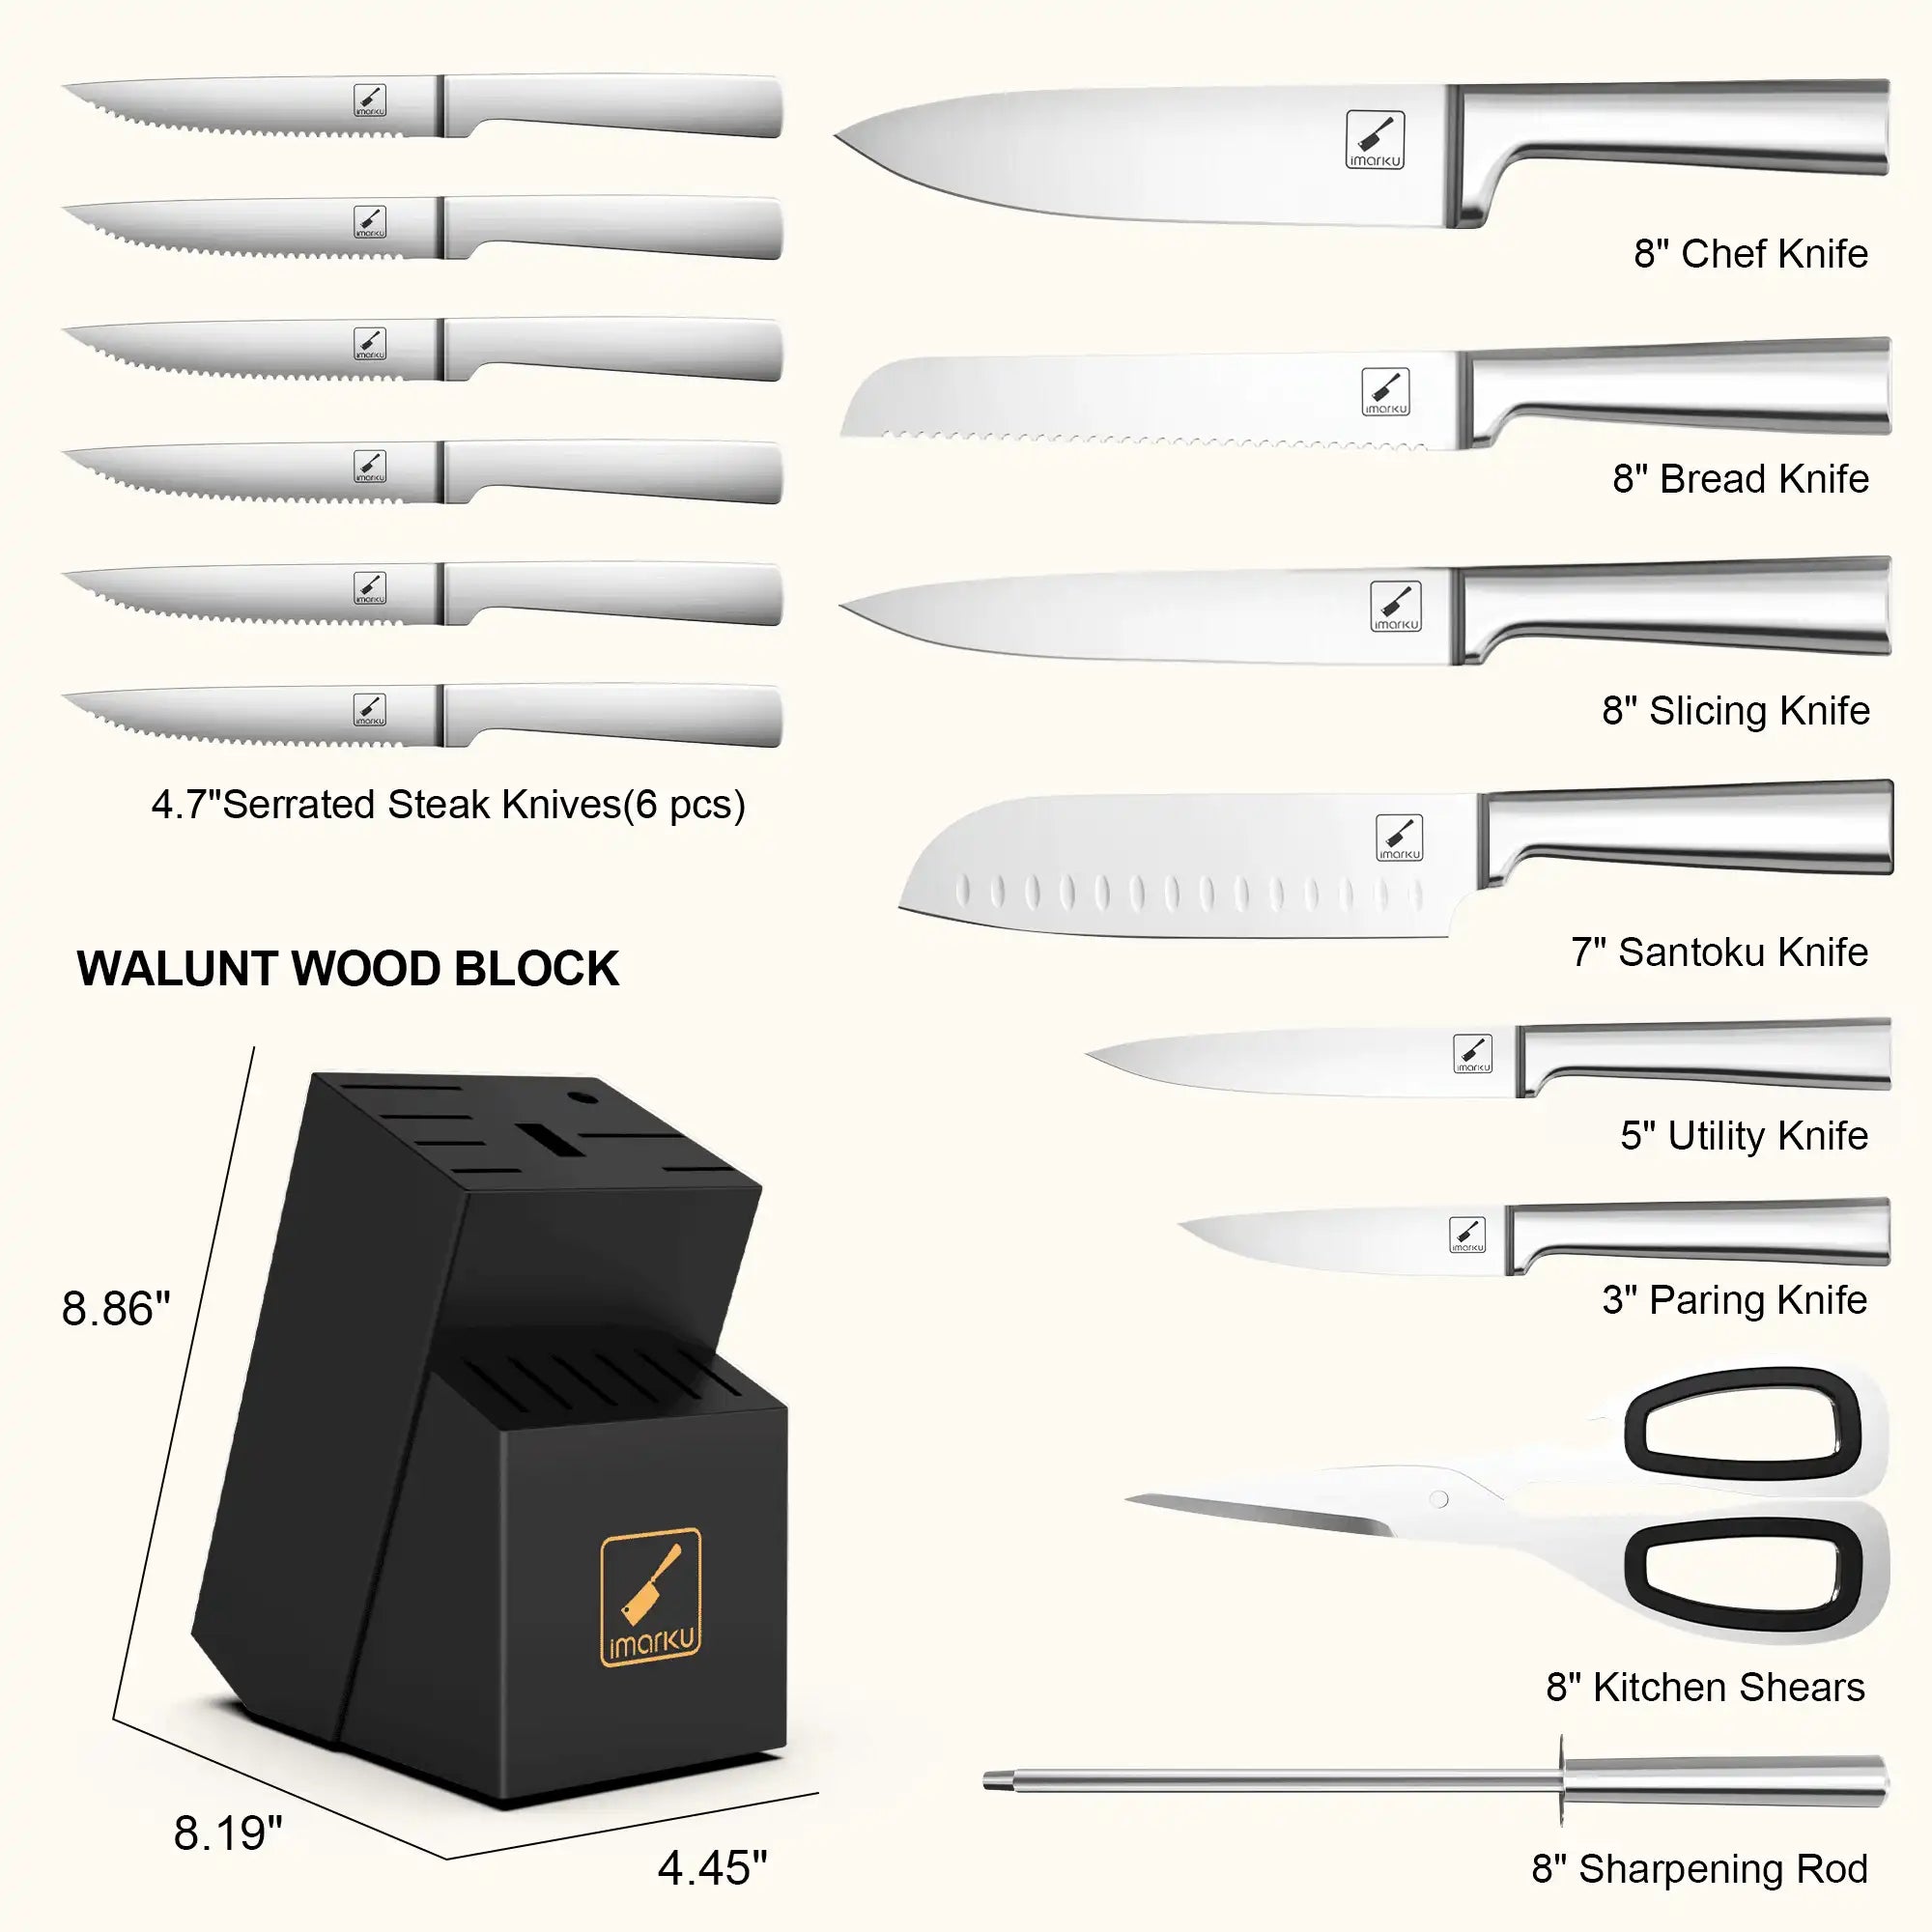 Everything You Need to Know About the Paring Knife - IMARKU